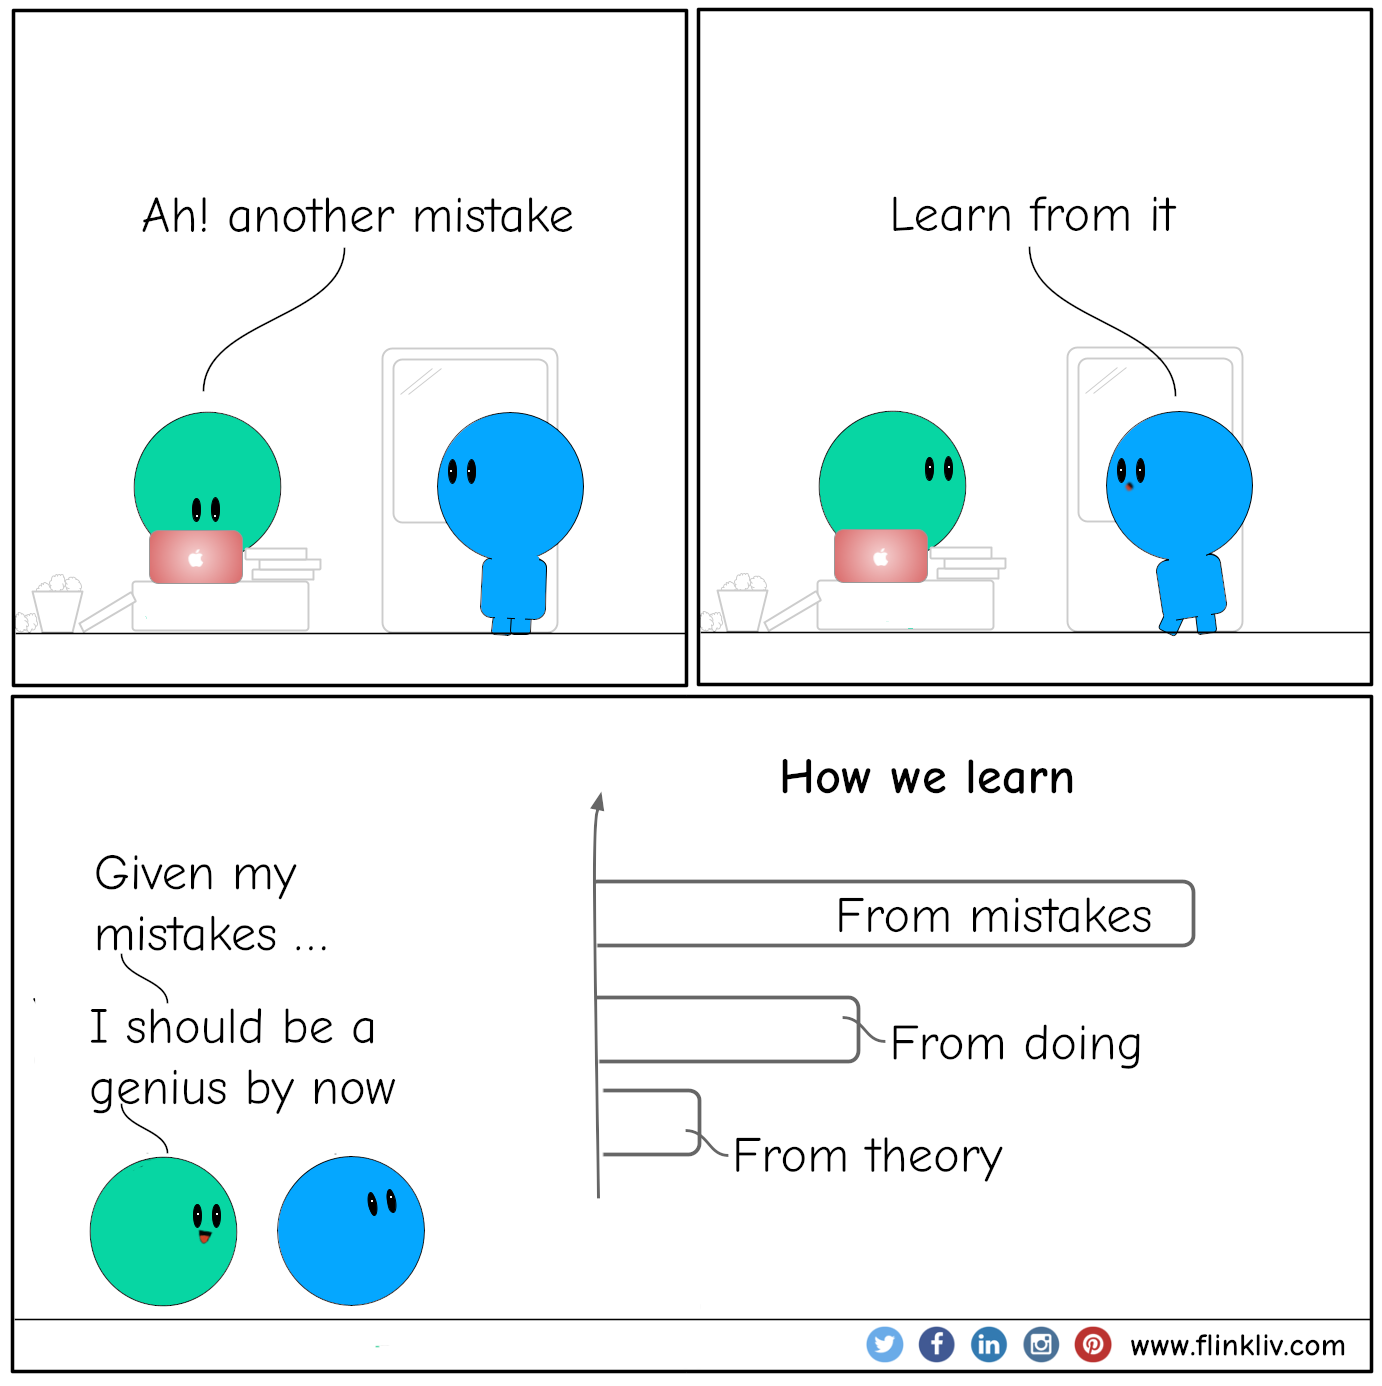 Conversation between A and B about how we learn from mistakes
				A: Ah! another mistake
				B: Learn from it
				A: Given my mistakes, I should be a genius by now.
              